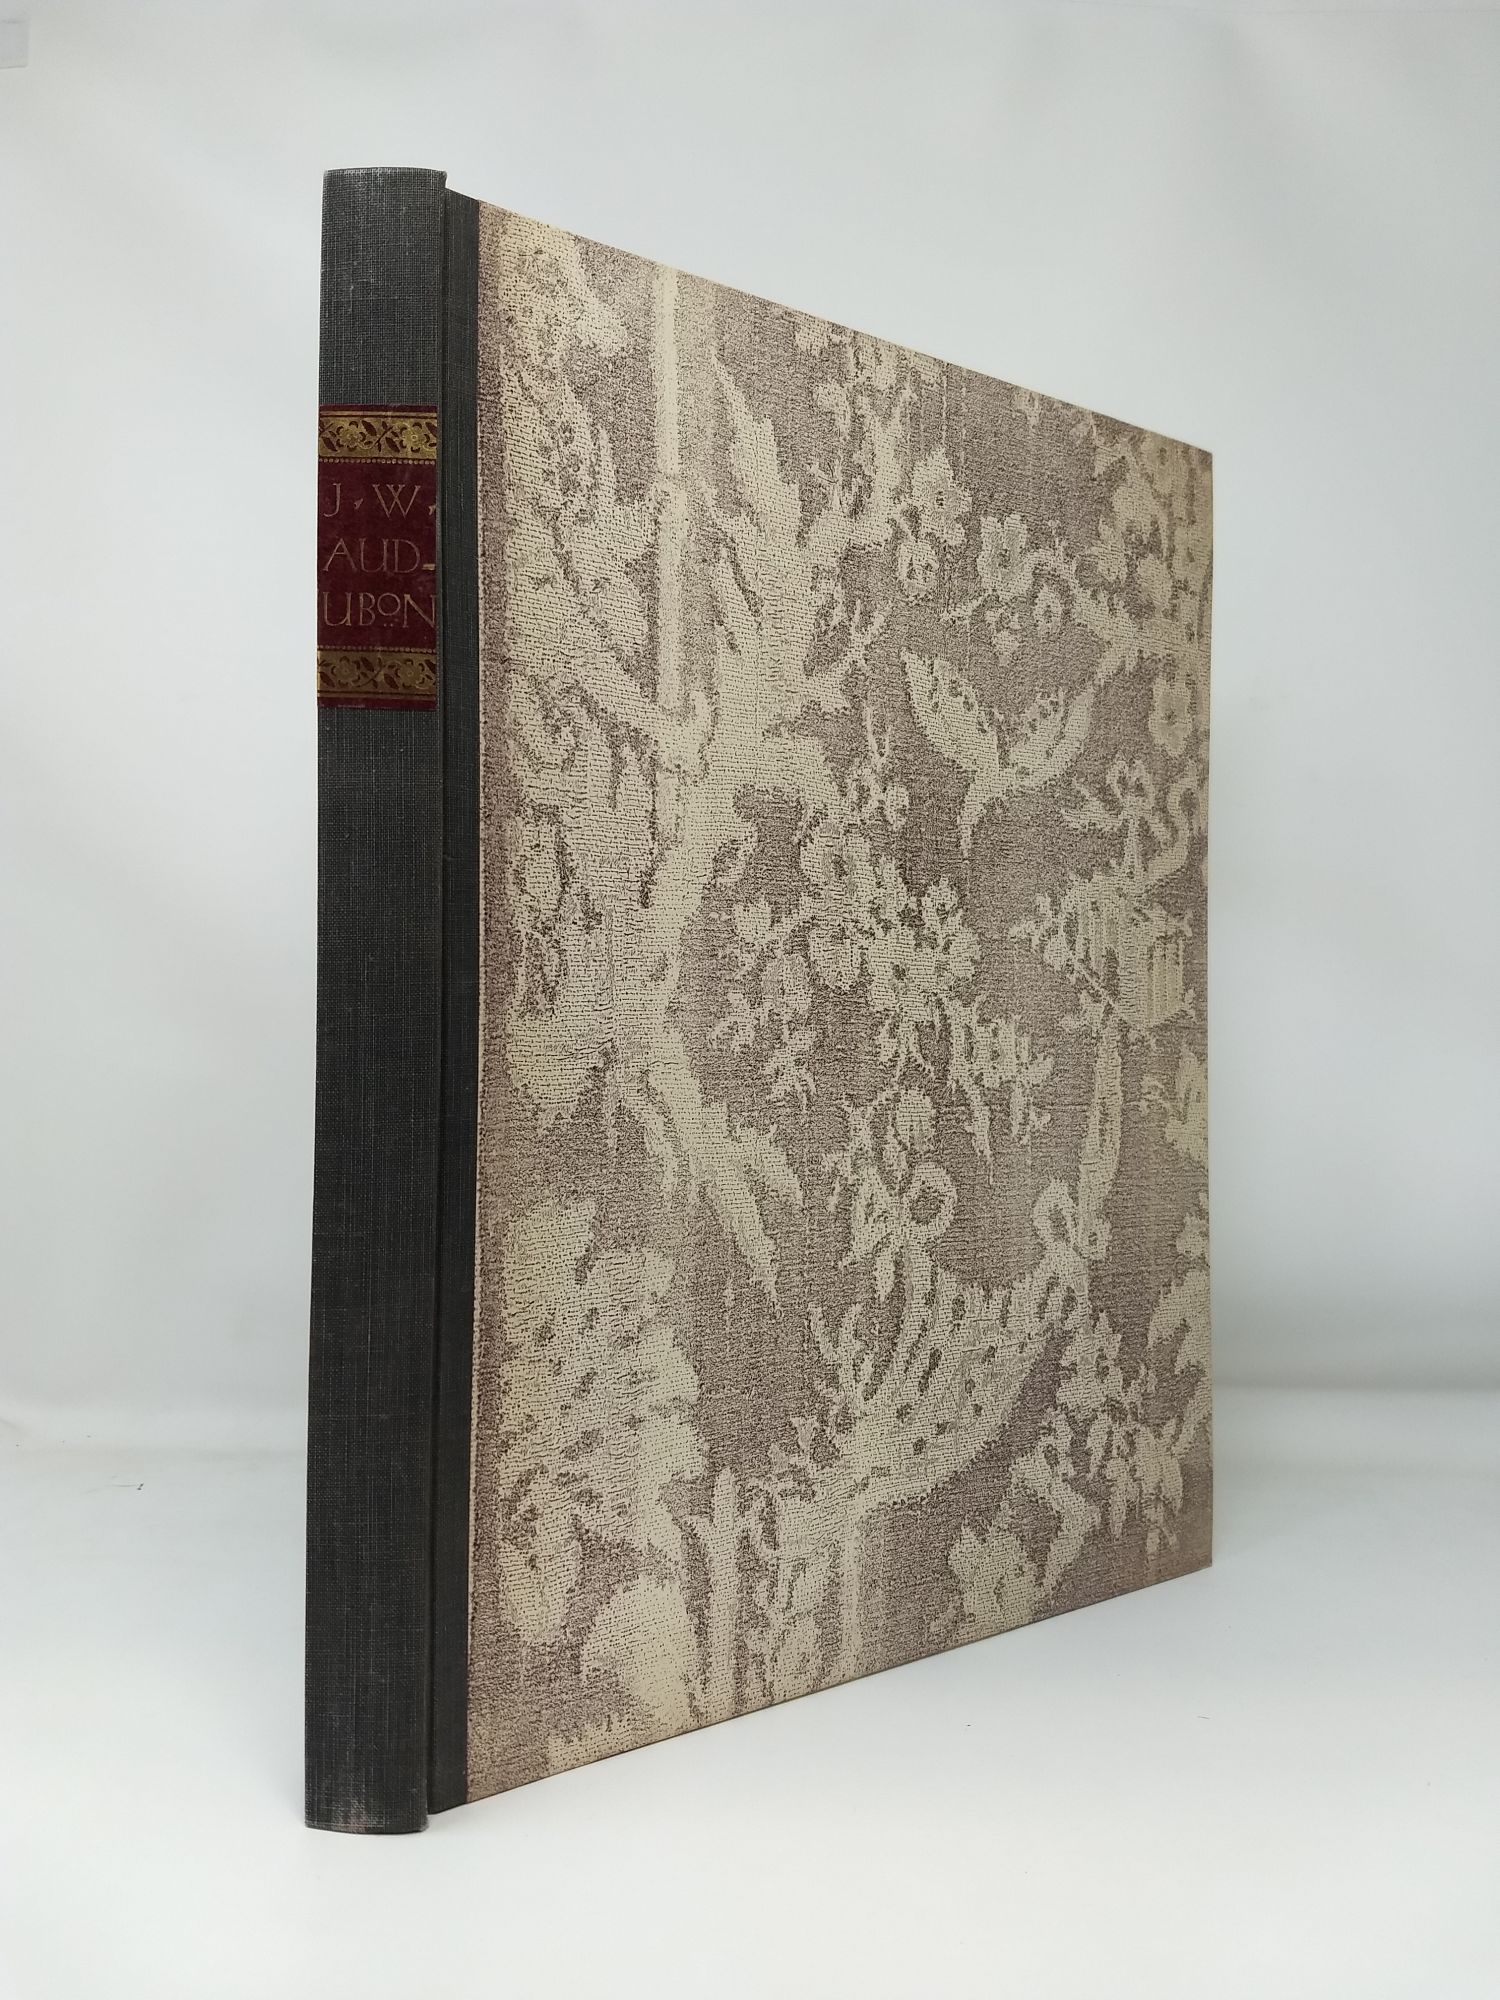 Dentzel, Carl Schaefer - The Drawings of John Woodhouse Audubon, Illustrating His Adventures Through Mexico and California 1849-1850 with an Introduction by Carl Schaefer Dentzel